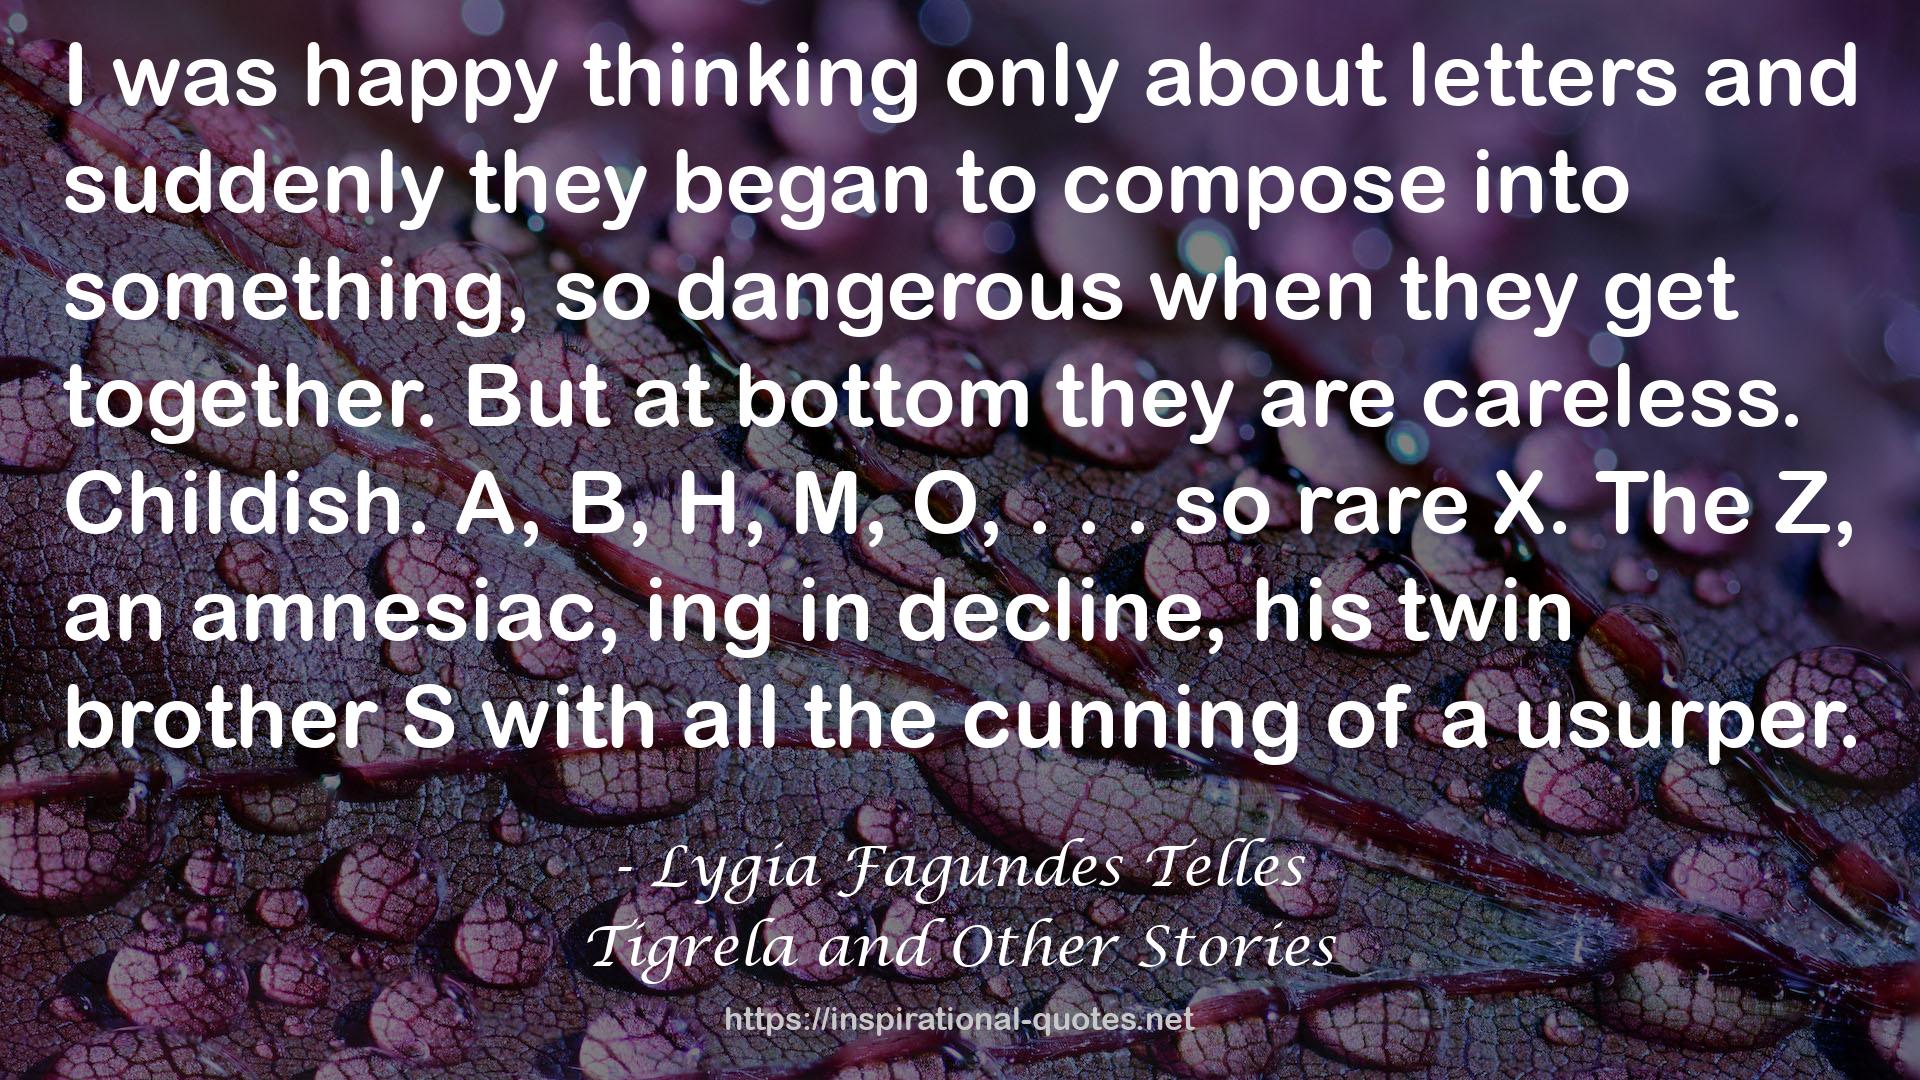 Tigrela and Other Stories QUOTES